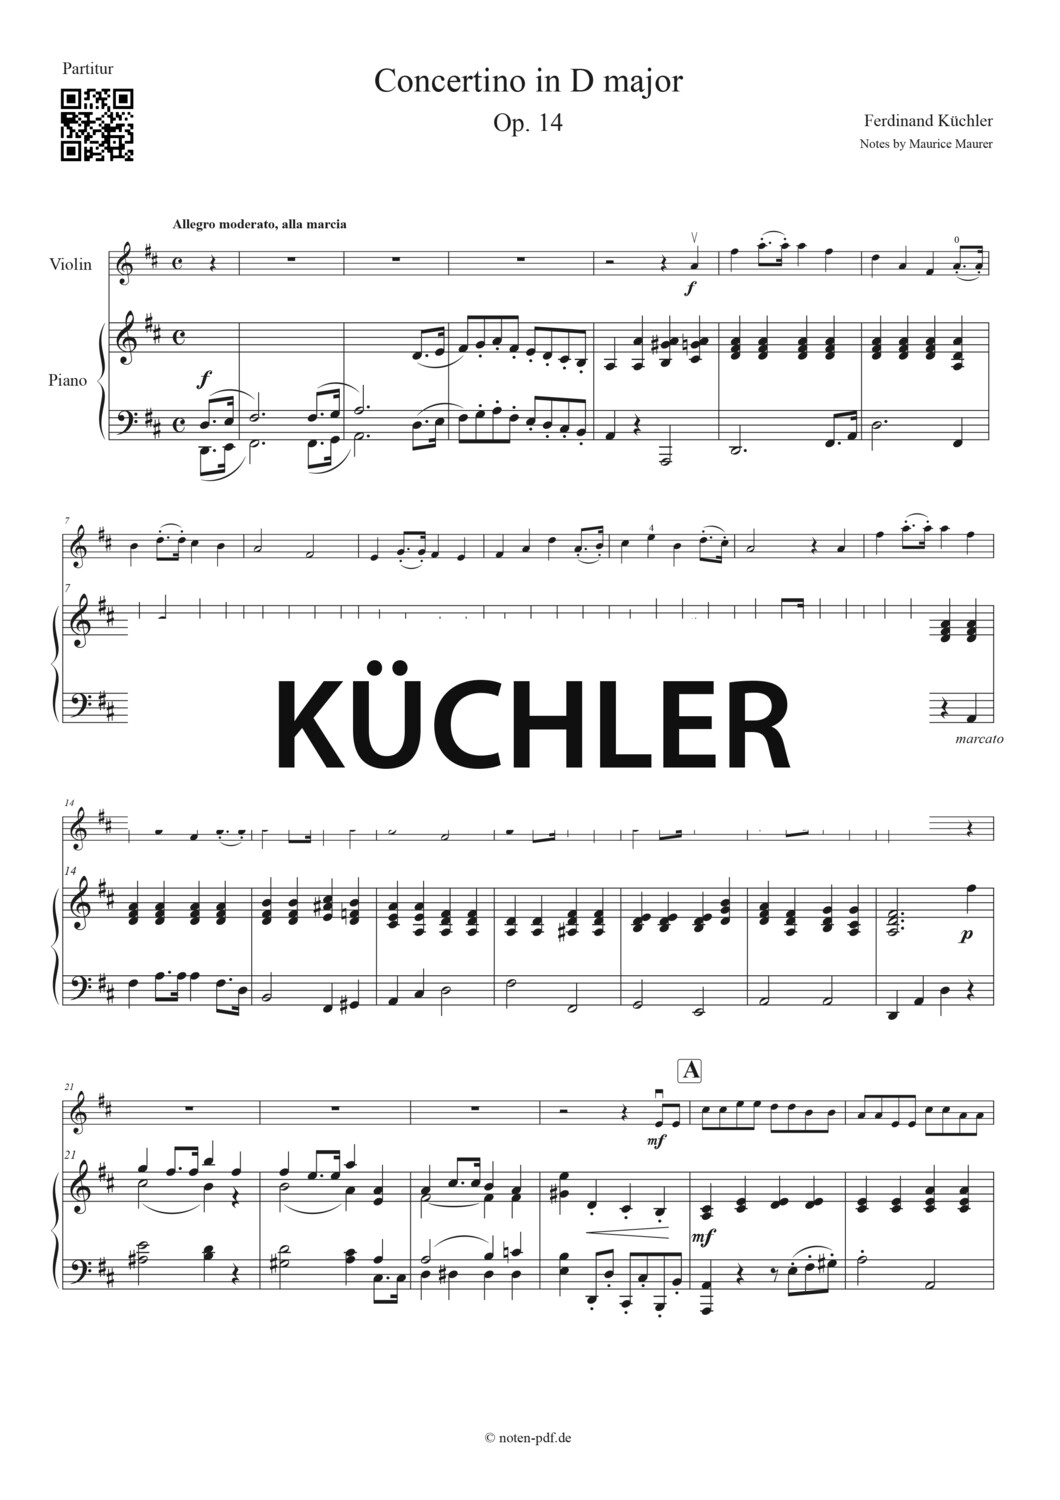 Küchler: Concertino Op. 14 - 3. Movement